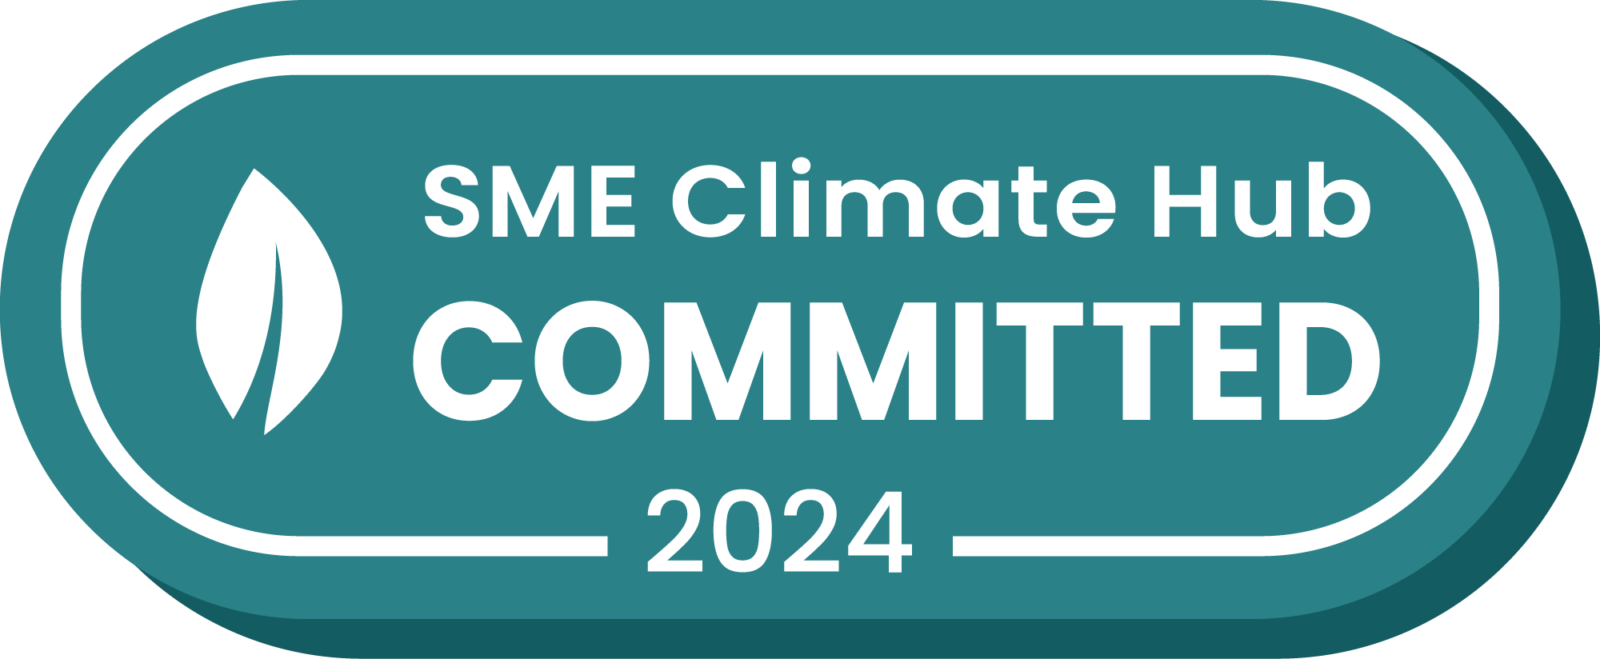 2024 SME Committed Badge